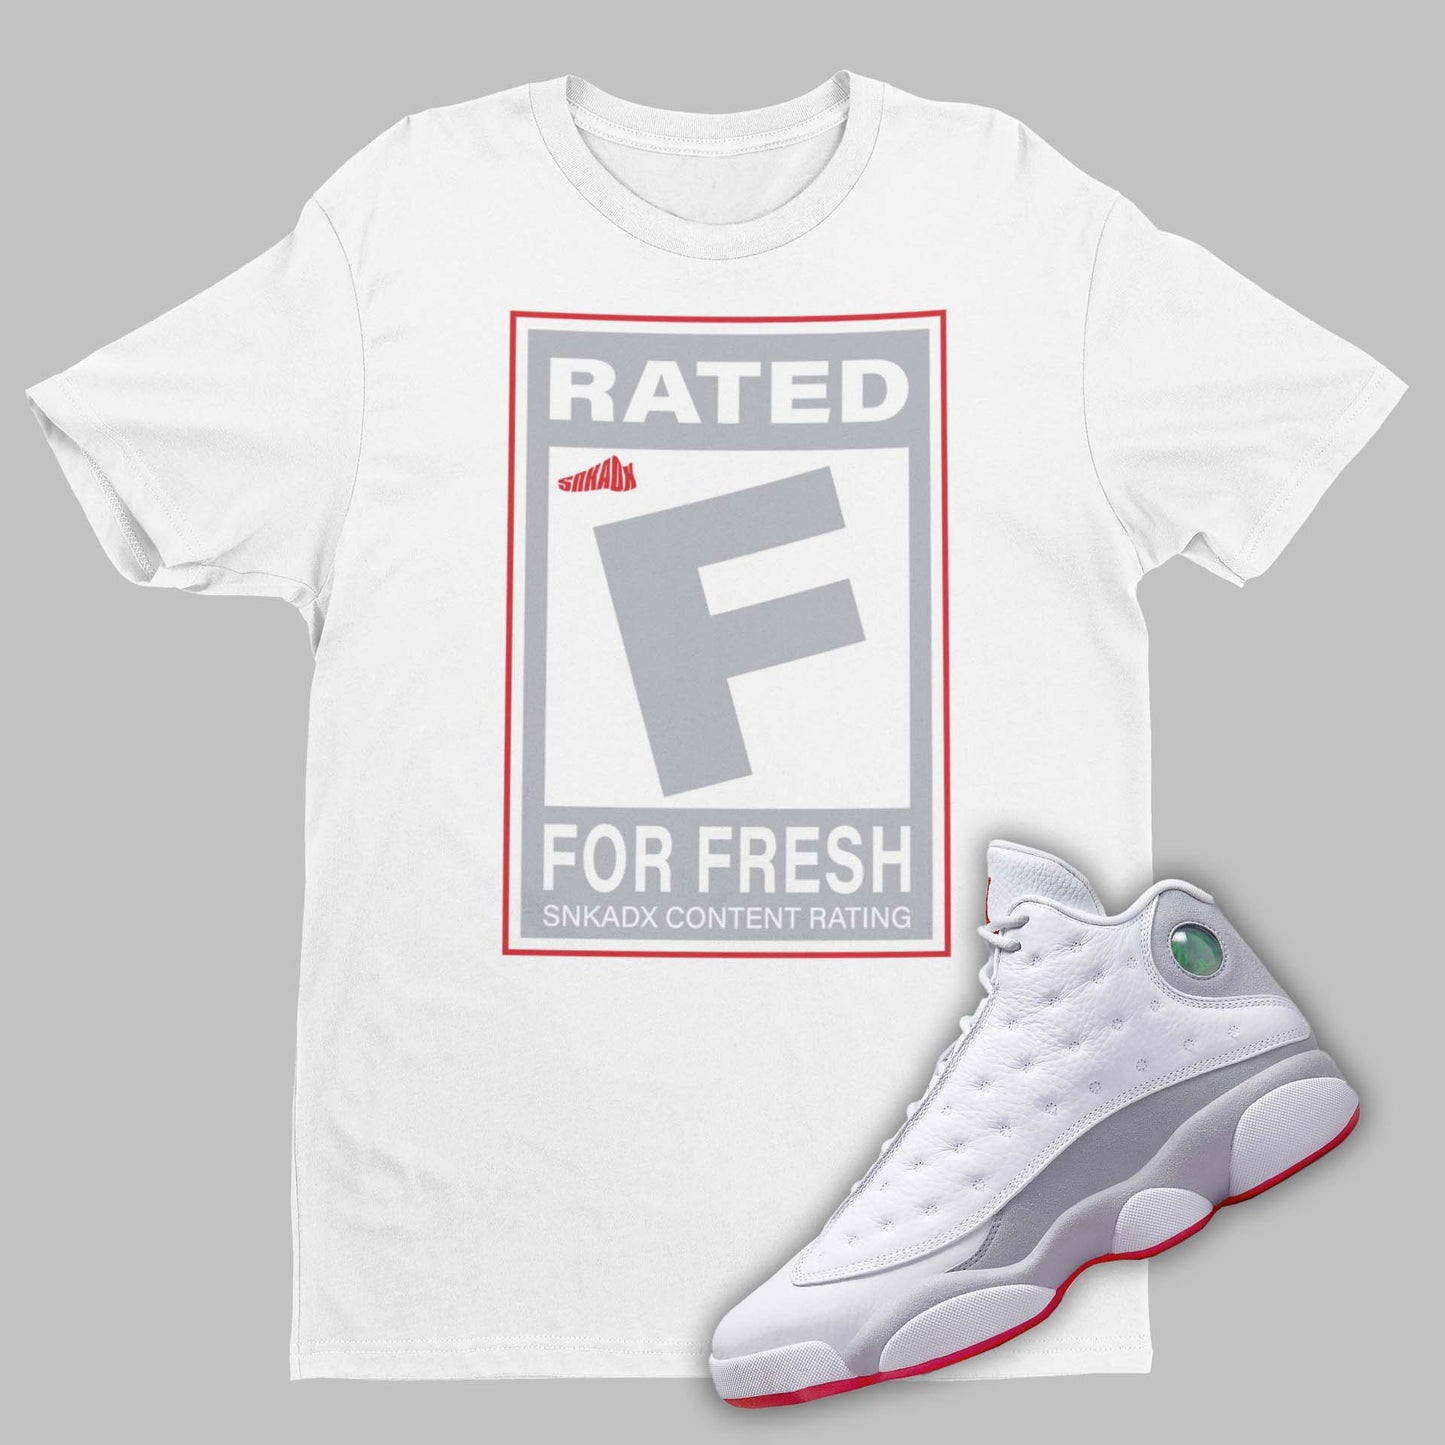  Rated F For Fresh Air Jordan 13 Wolf Grey Matching T-Shirt with video game rating on the front from SNKADX